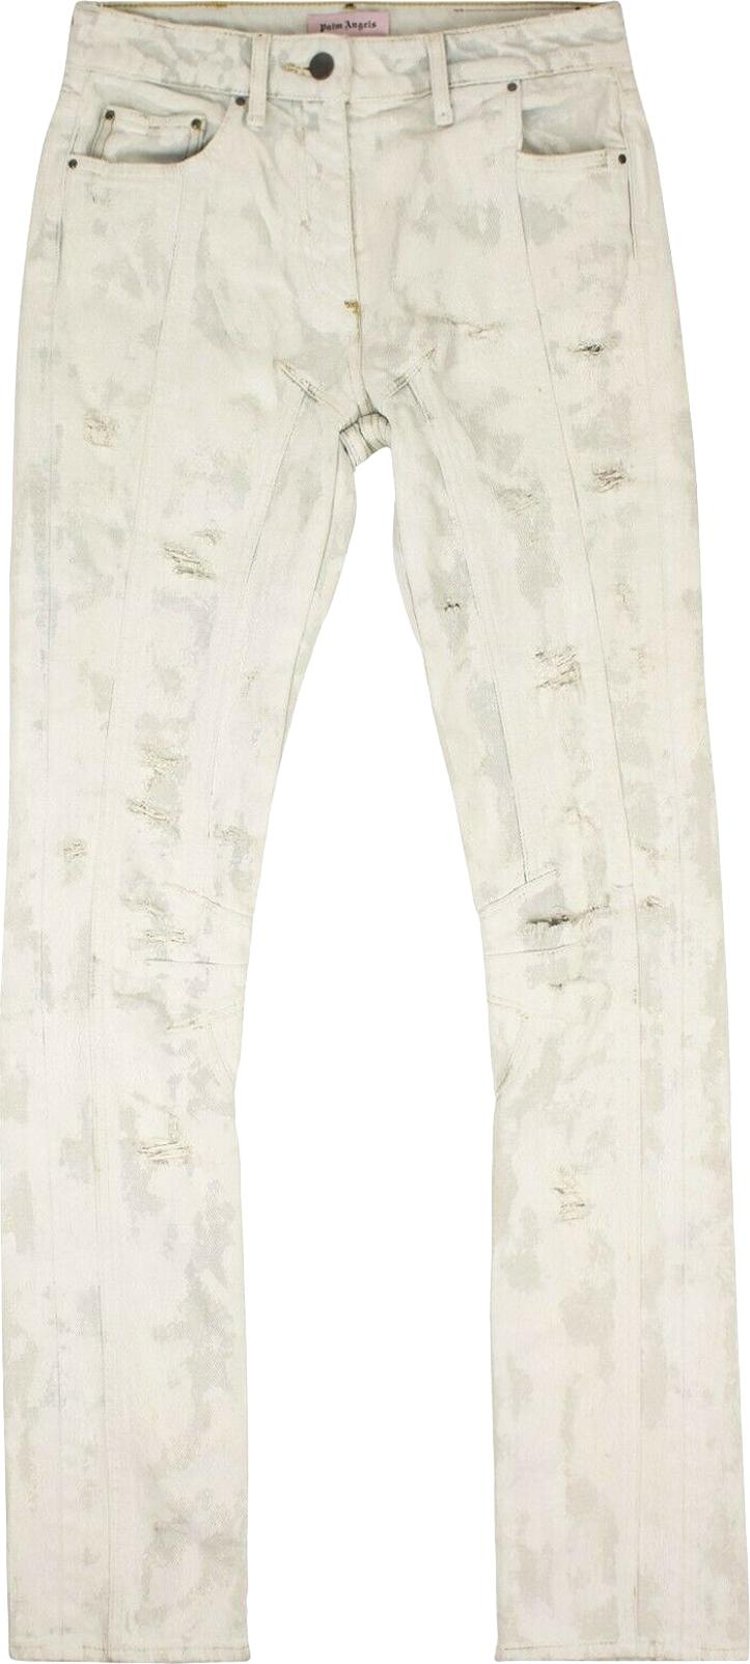 Palm Angels Tie Dye Distressed Jeans 'Blue/White'